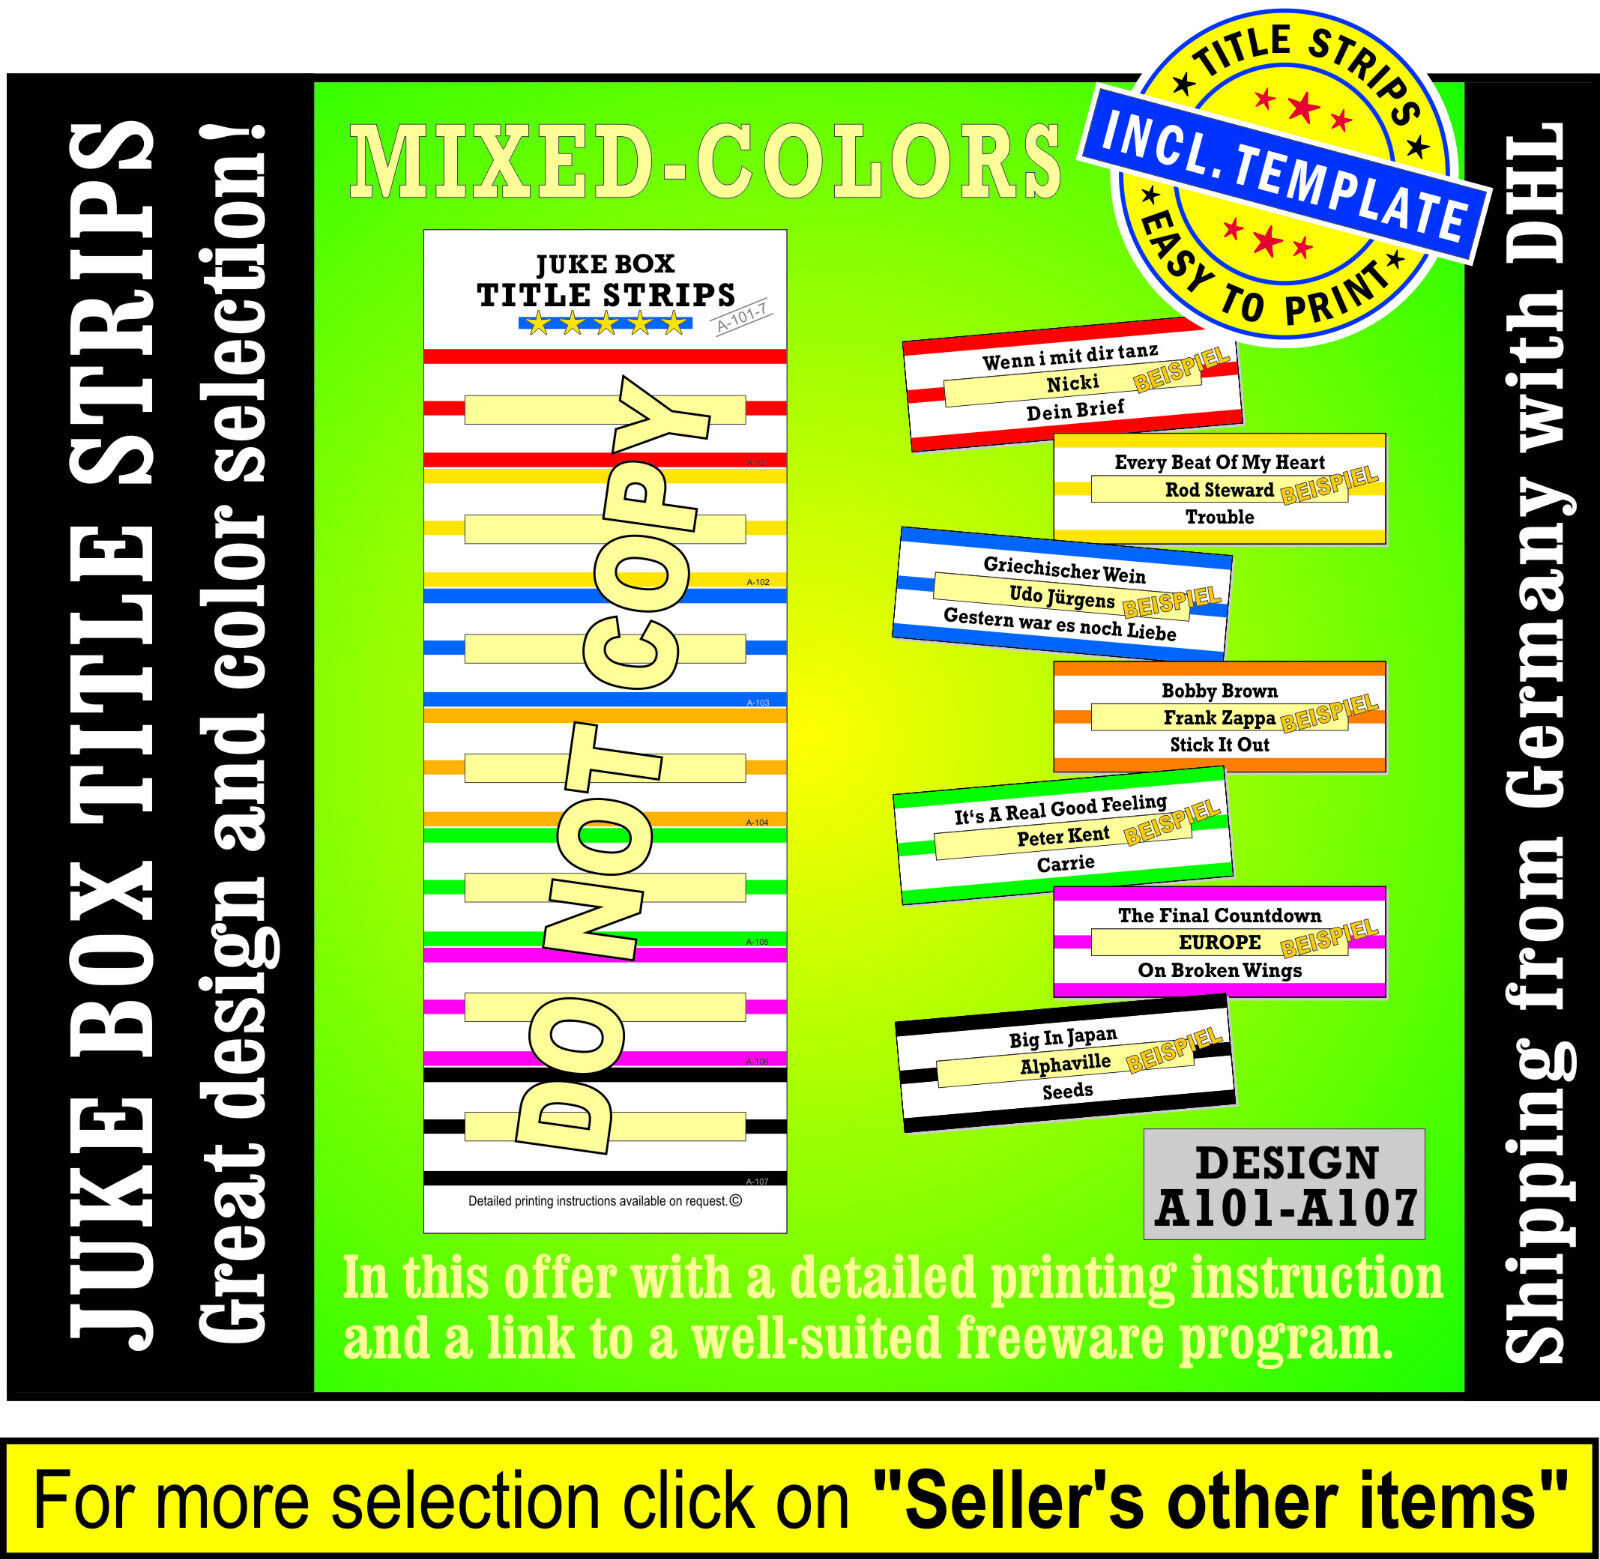 ⭐⭐⭐ 500 Jukebox Title Strips MIXED-COLORS = 72 blank sheeds incl. Print.Template